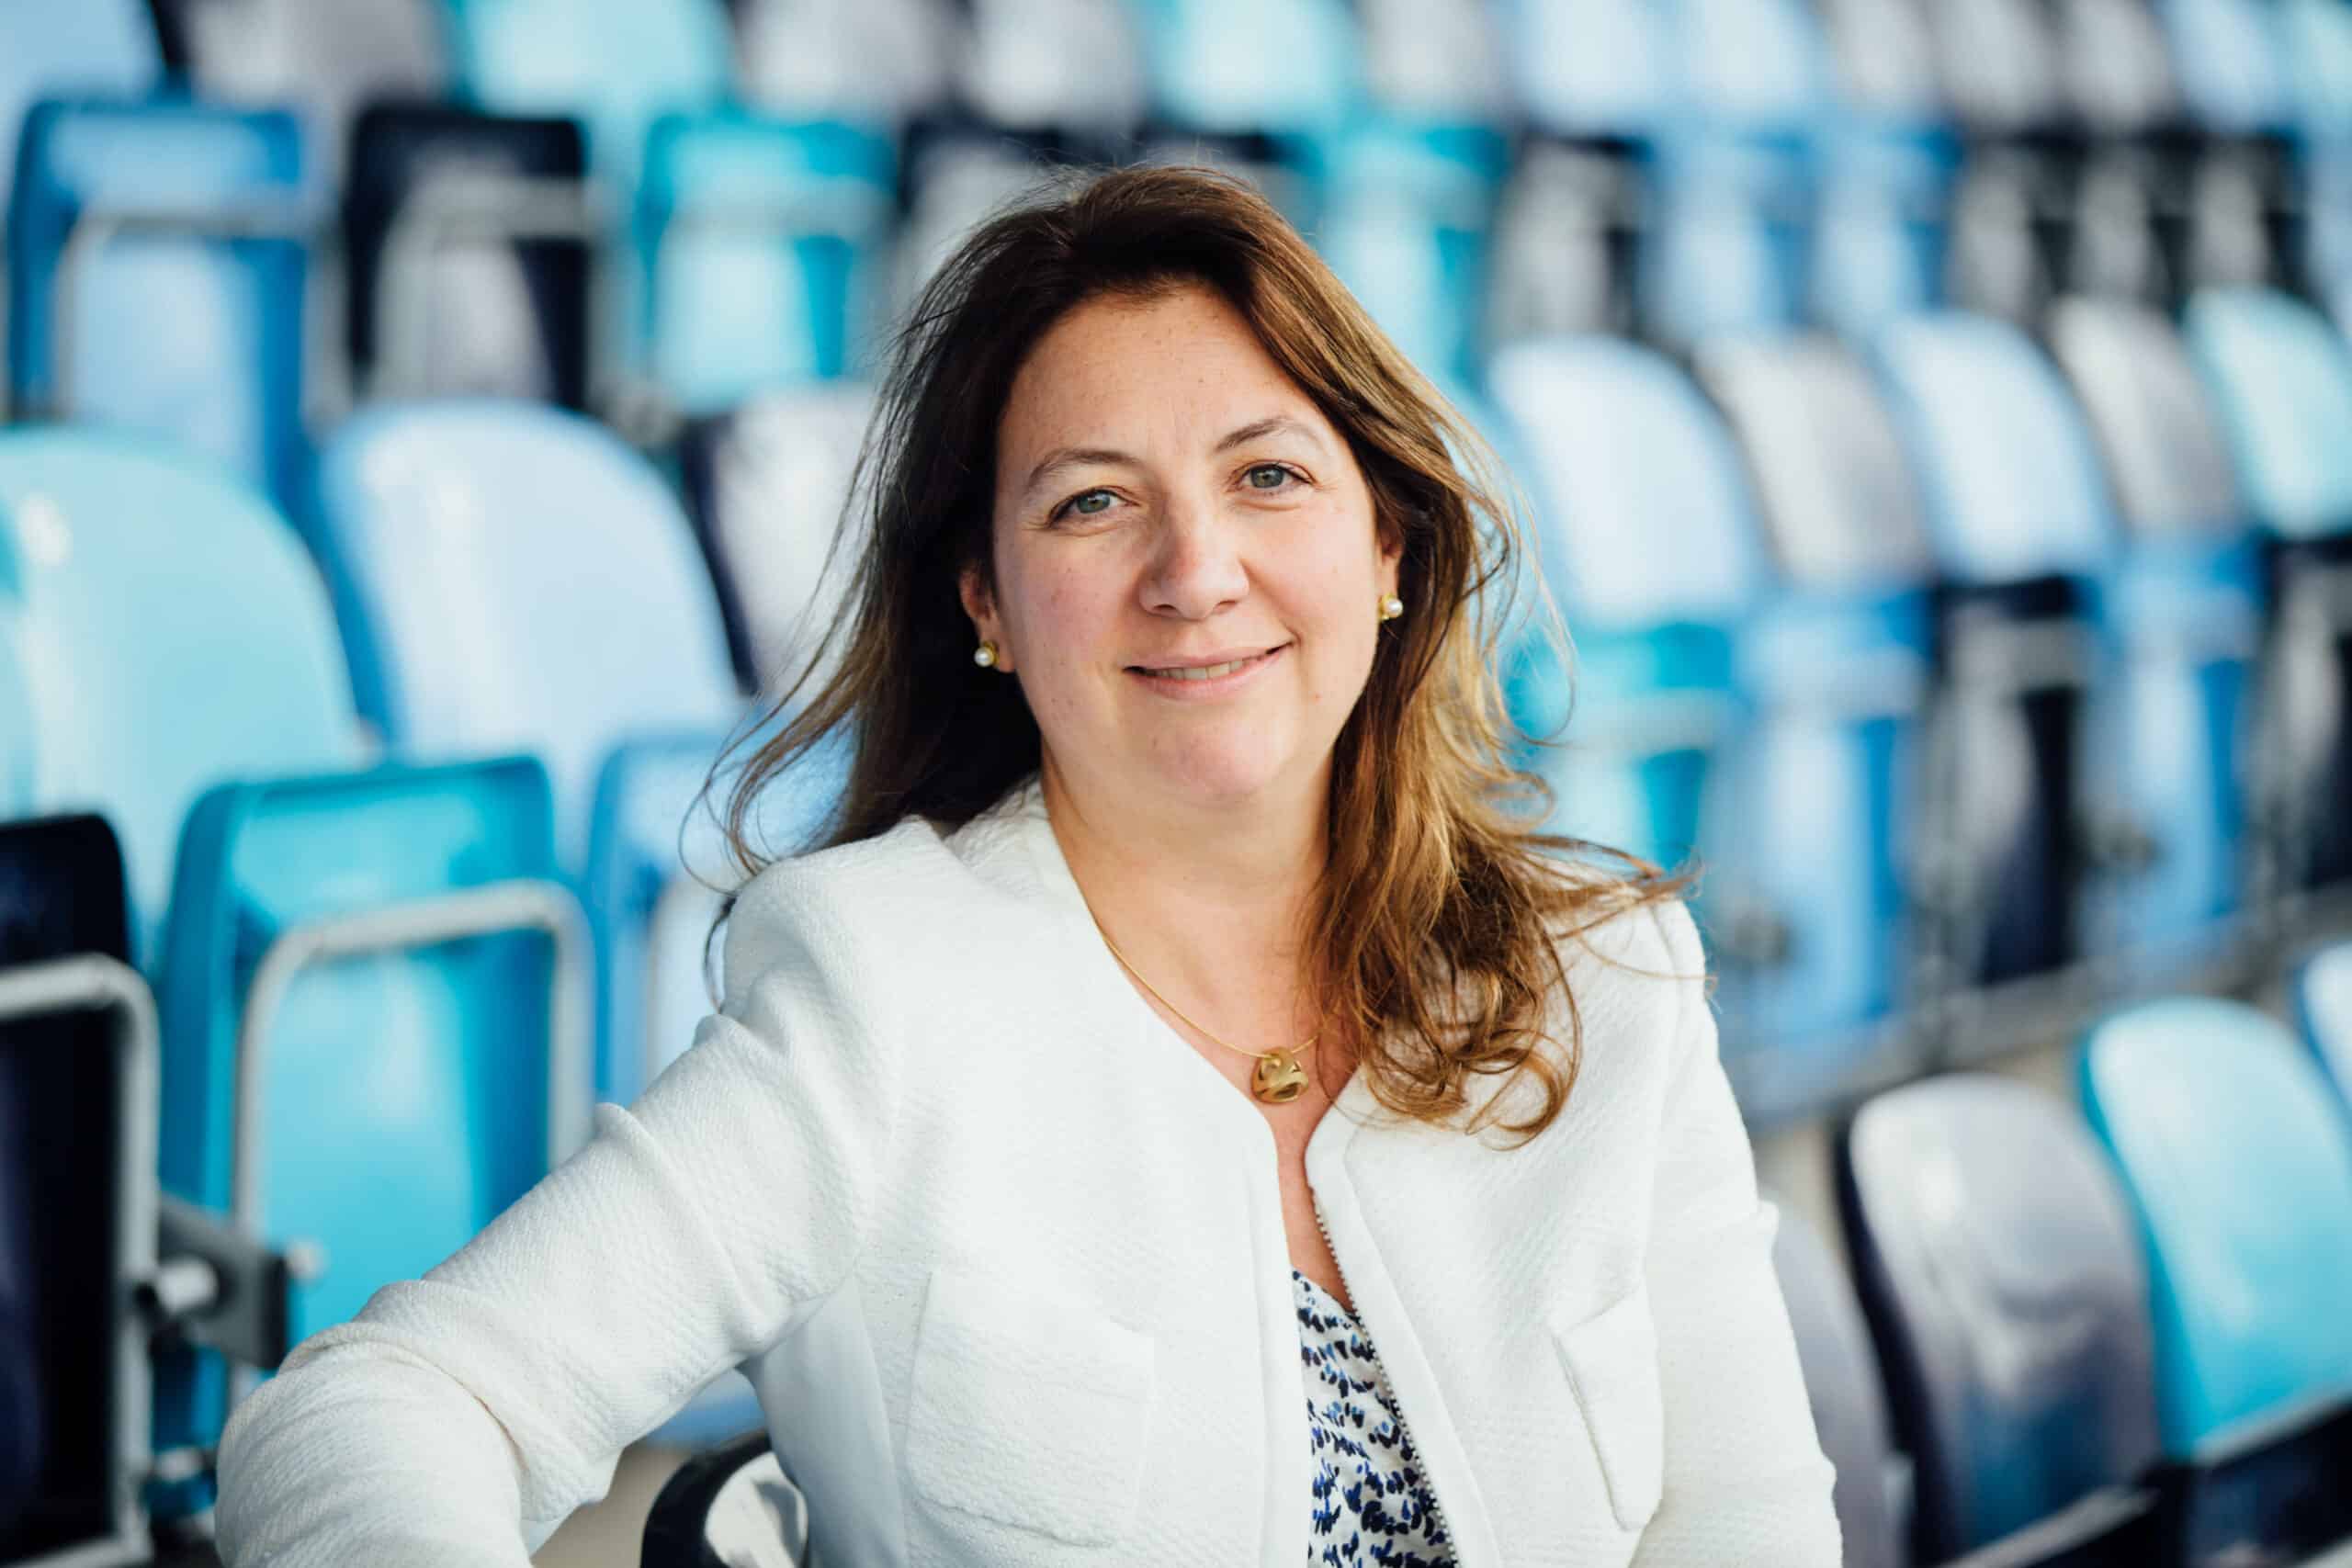 Nuria Tarre, Chief Marketing and Fan Experience Officer at City Football Group.